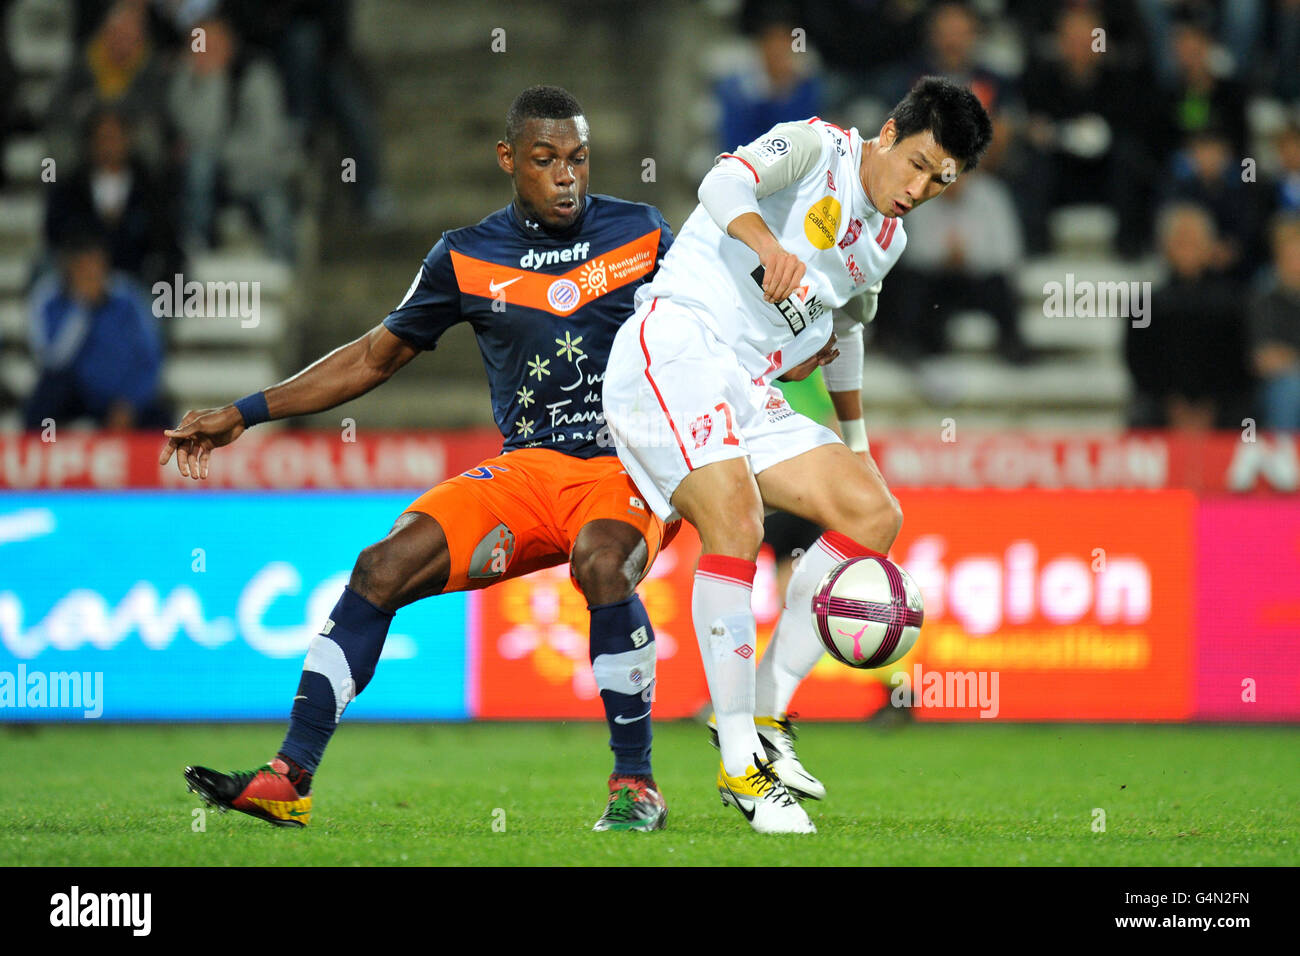 Montpellier's Henri Bedimo Nsame (left) and AS Nancy Lorraine's Jo-gook Jung (right) battle for the ball Stock Photo